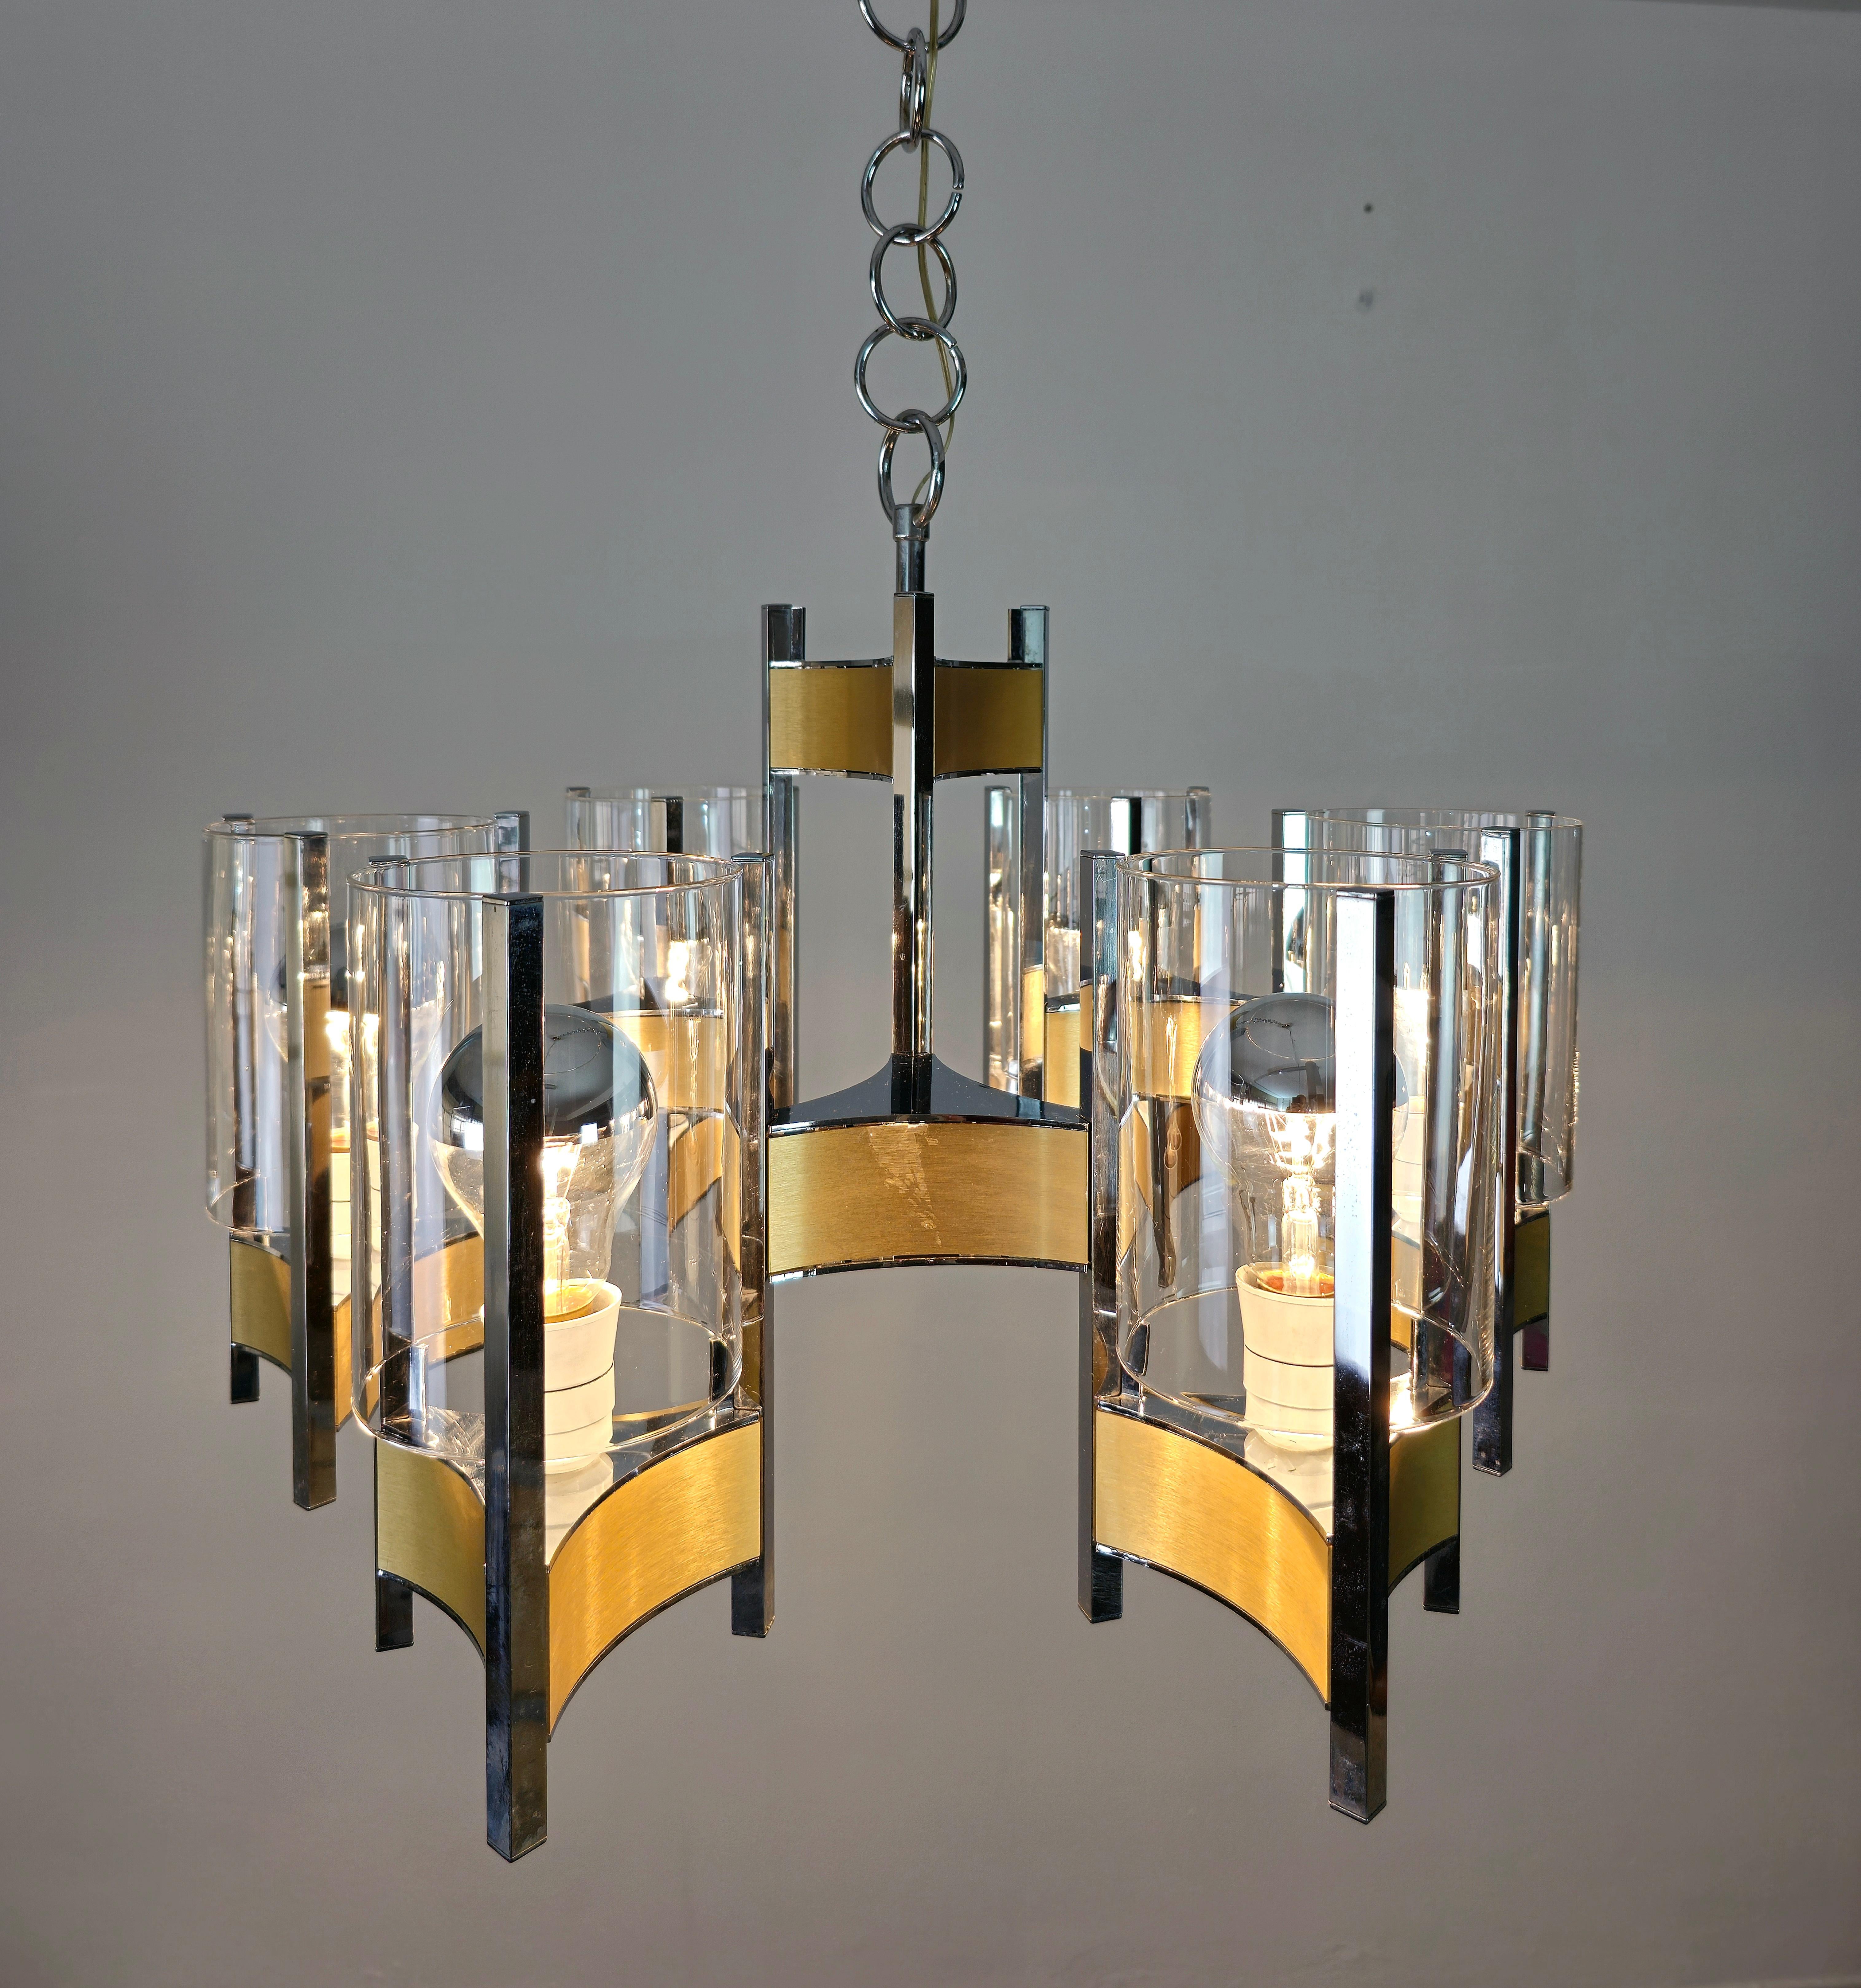 Elegant chandelier by Gaetano Sciolari with 6 E27 lights made with stems in chromed nickel finish and brushed brass colored panels, where each arm supports a transparent cylindrical glass. Made in Italy in the 60s. It has the original Sciolari stamp